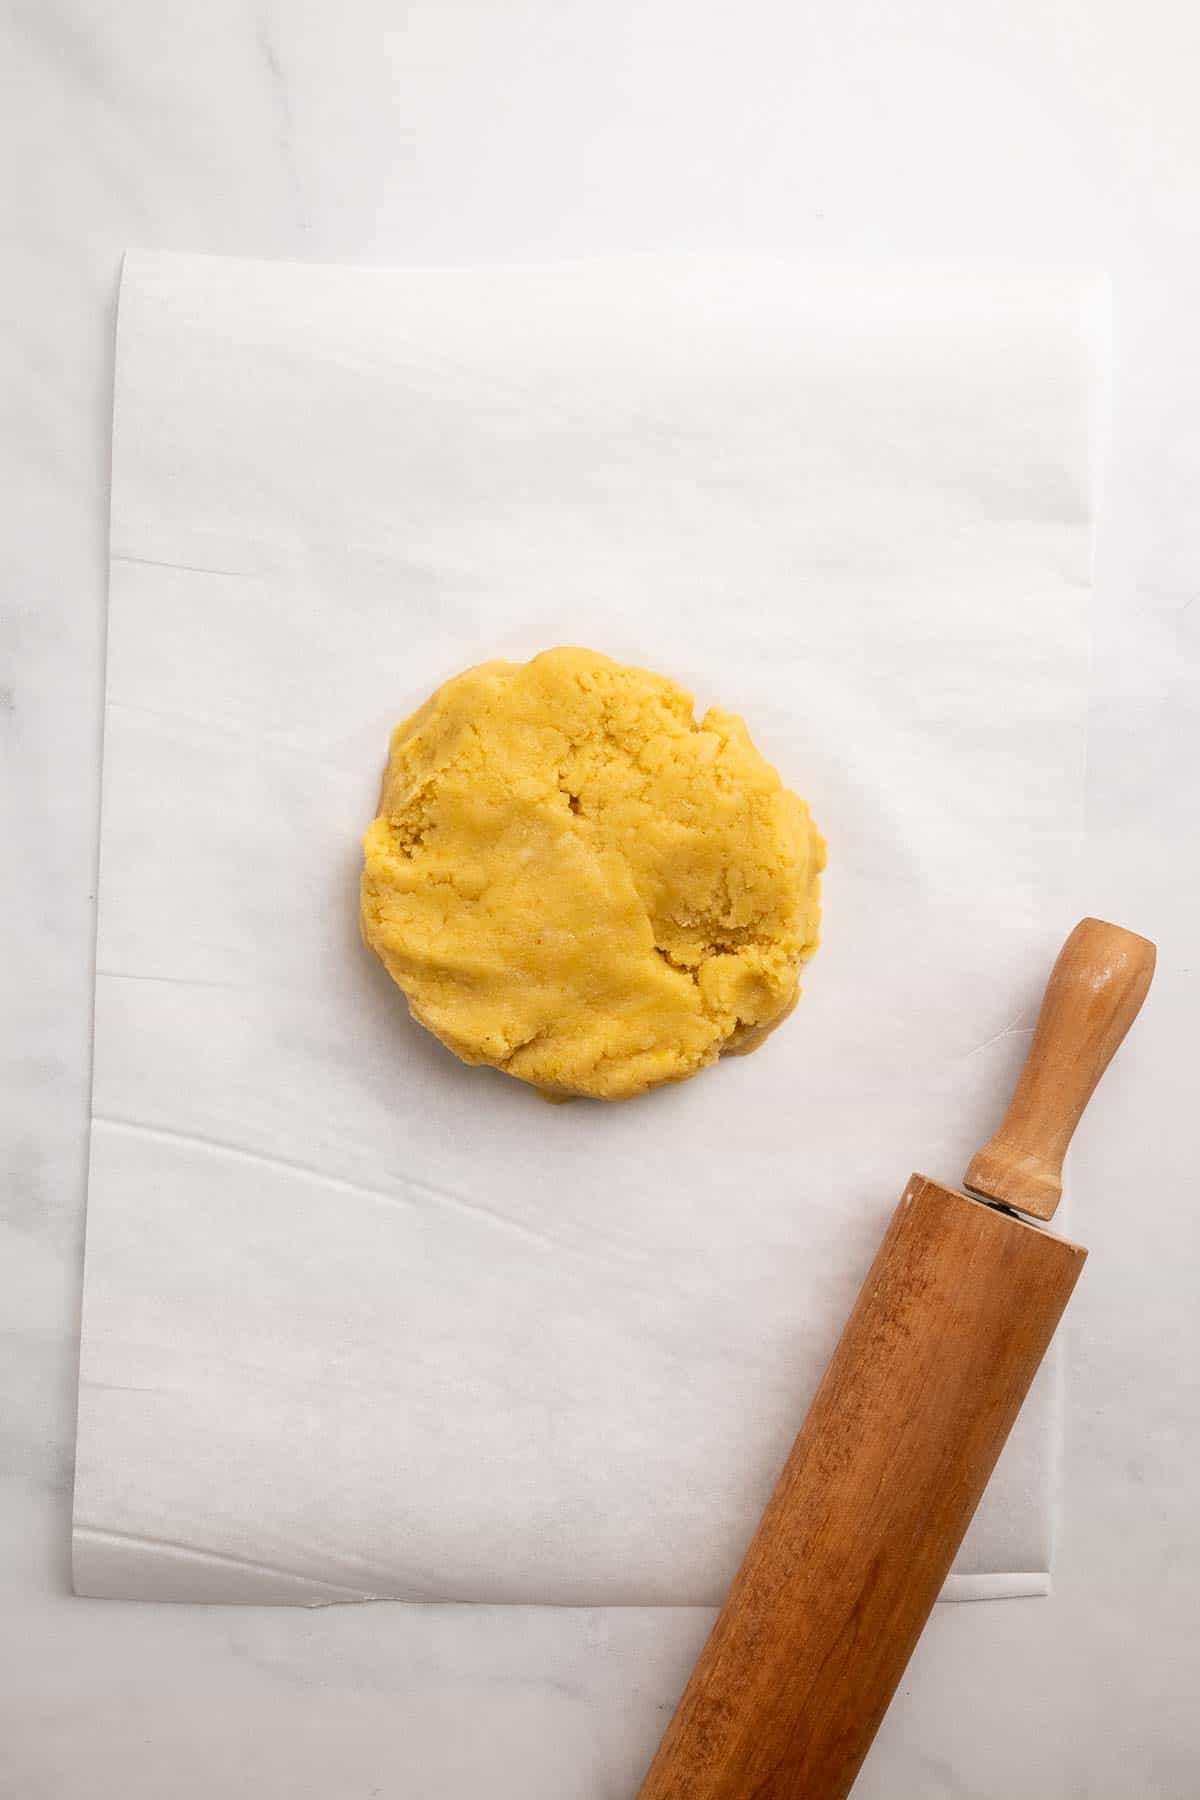 Dough flattened into a disk on a sheet of parchment paper